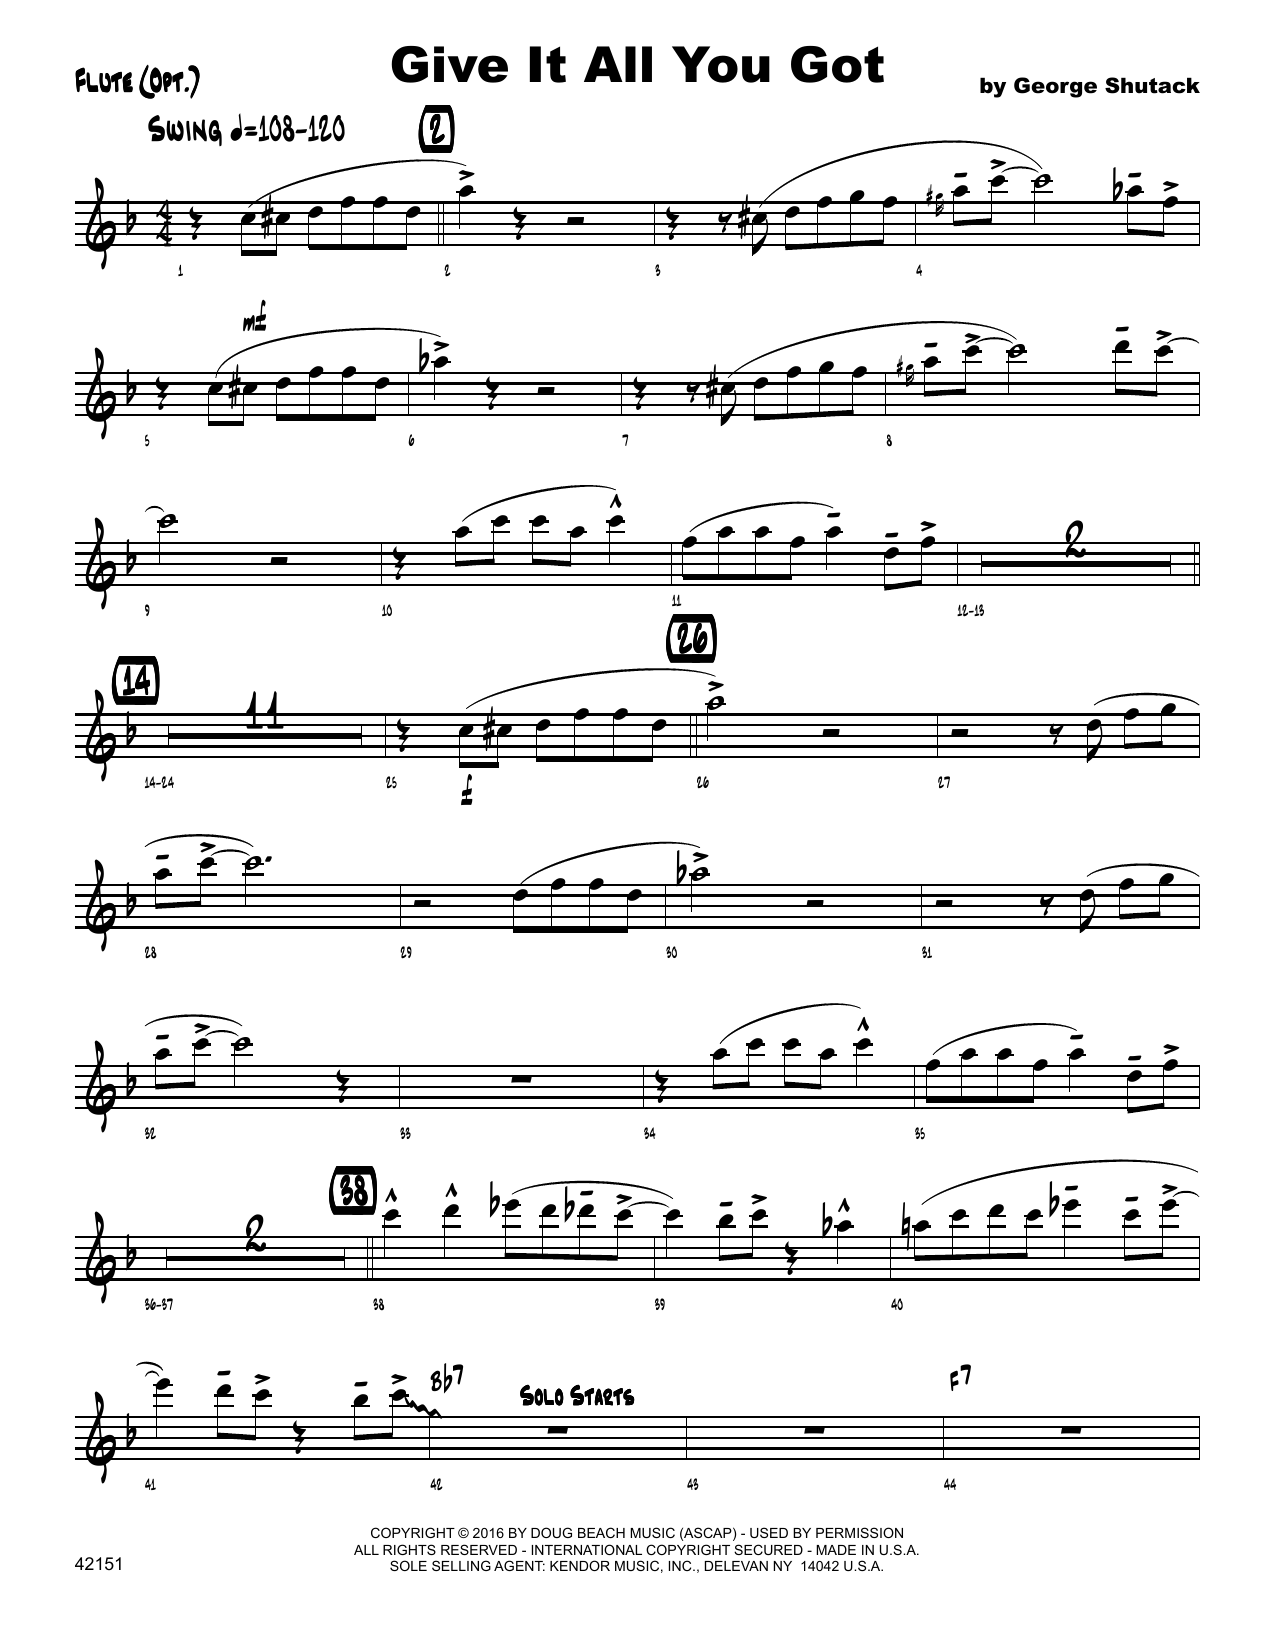 Download George Shutack Give It All You Got - Flute Sheet Music